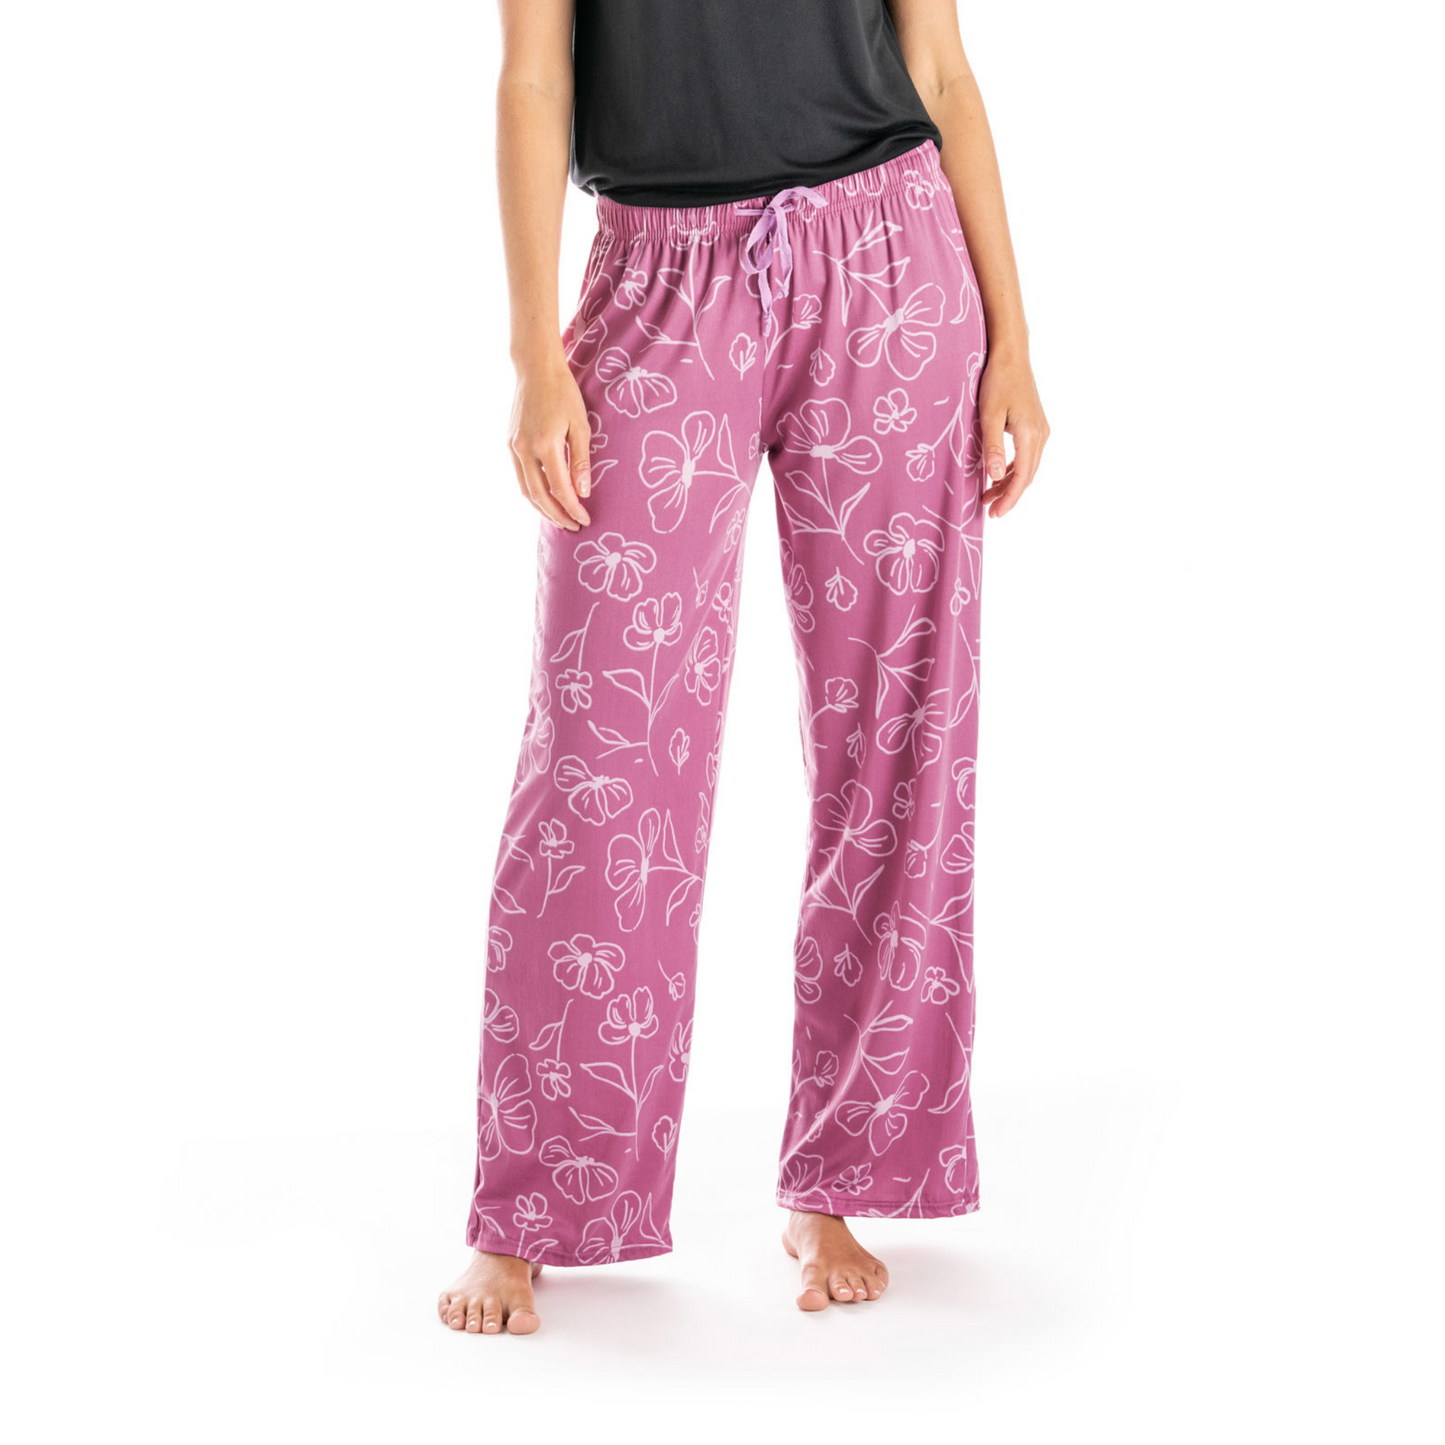 super soft pink flower loungewear pants with drawstring